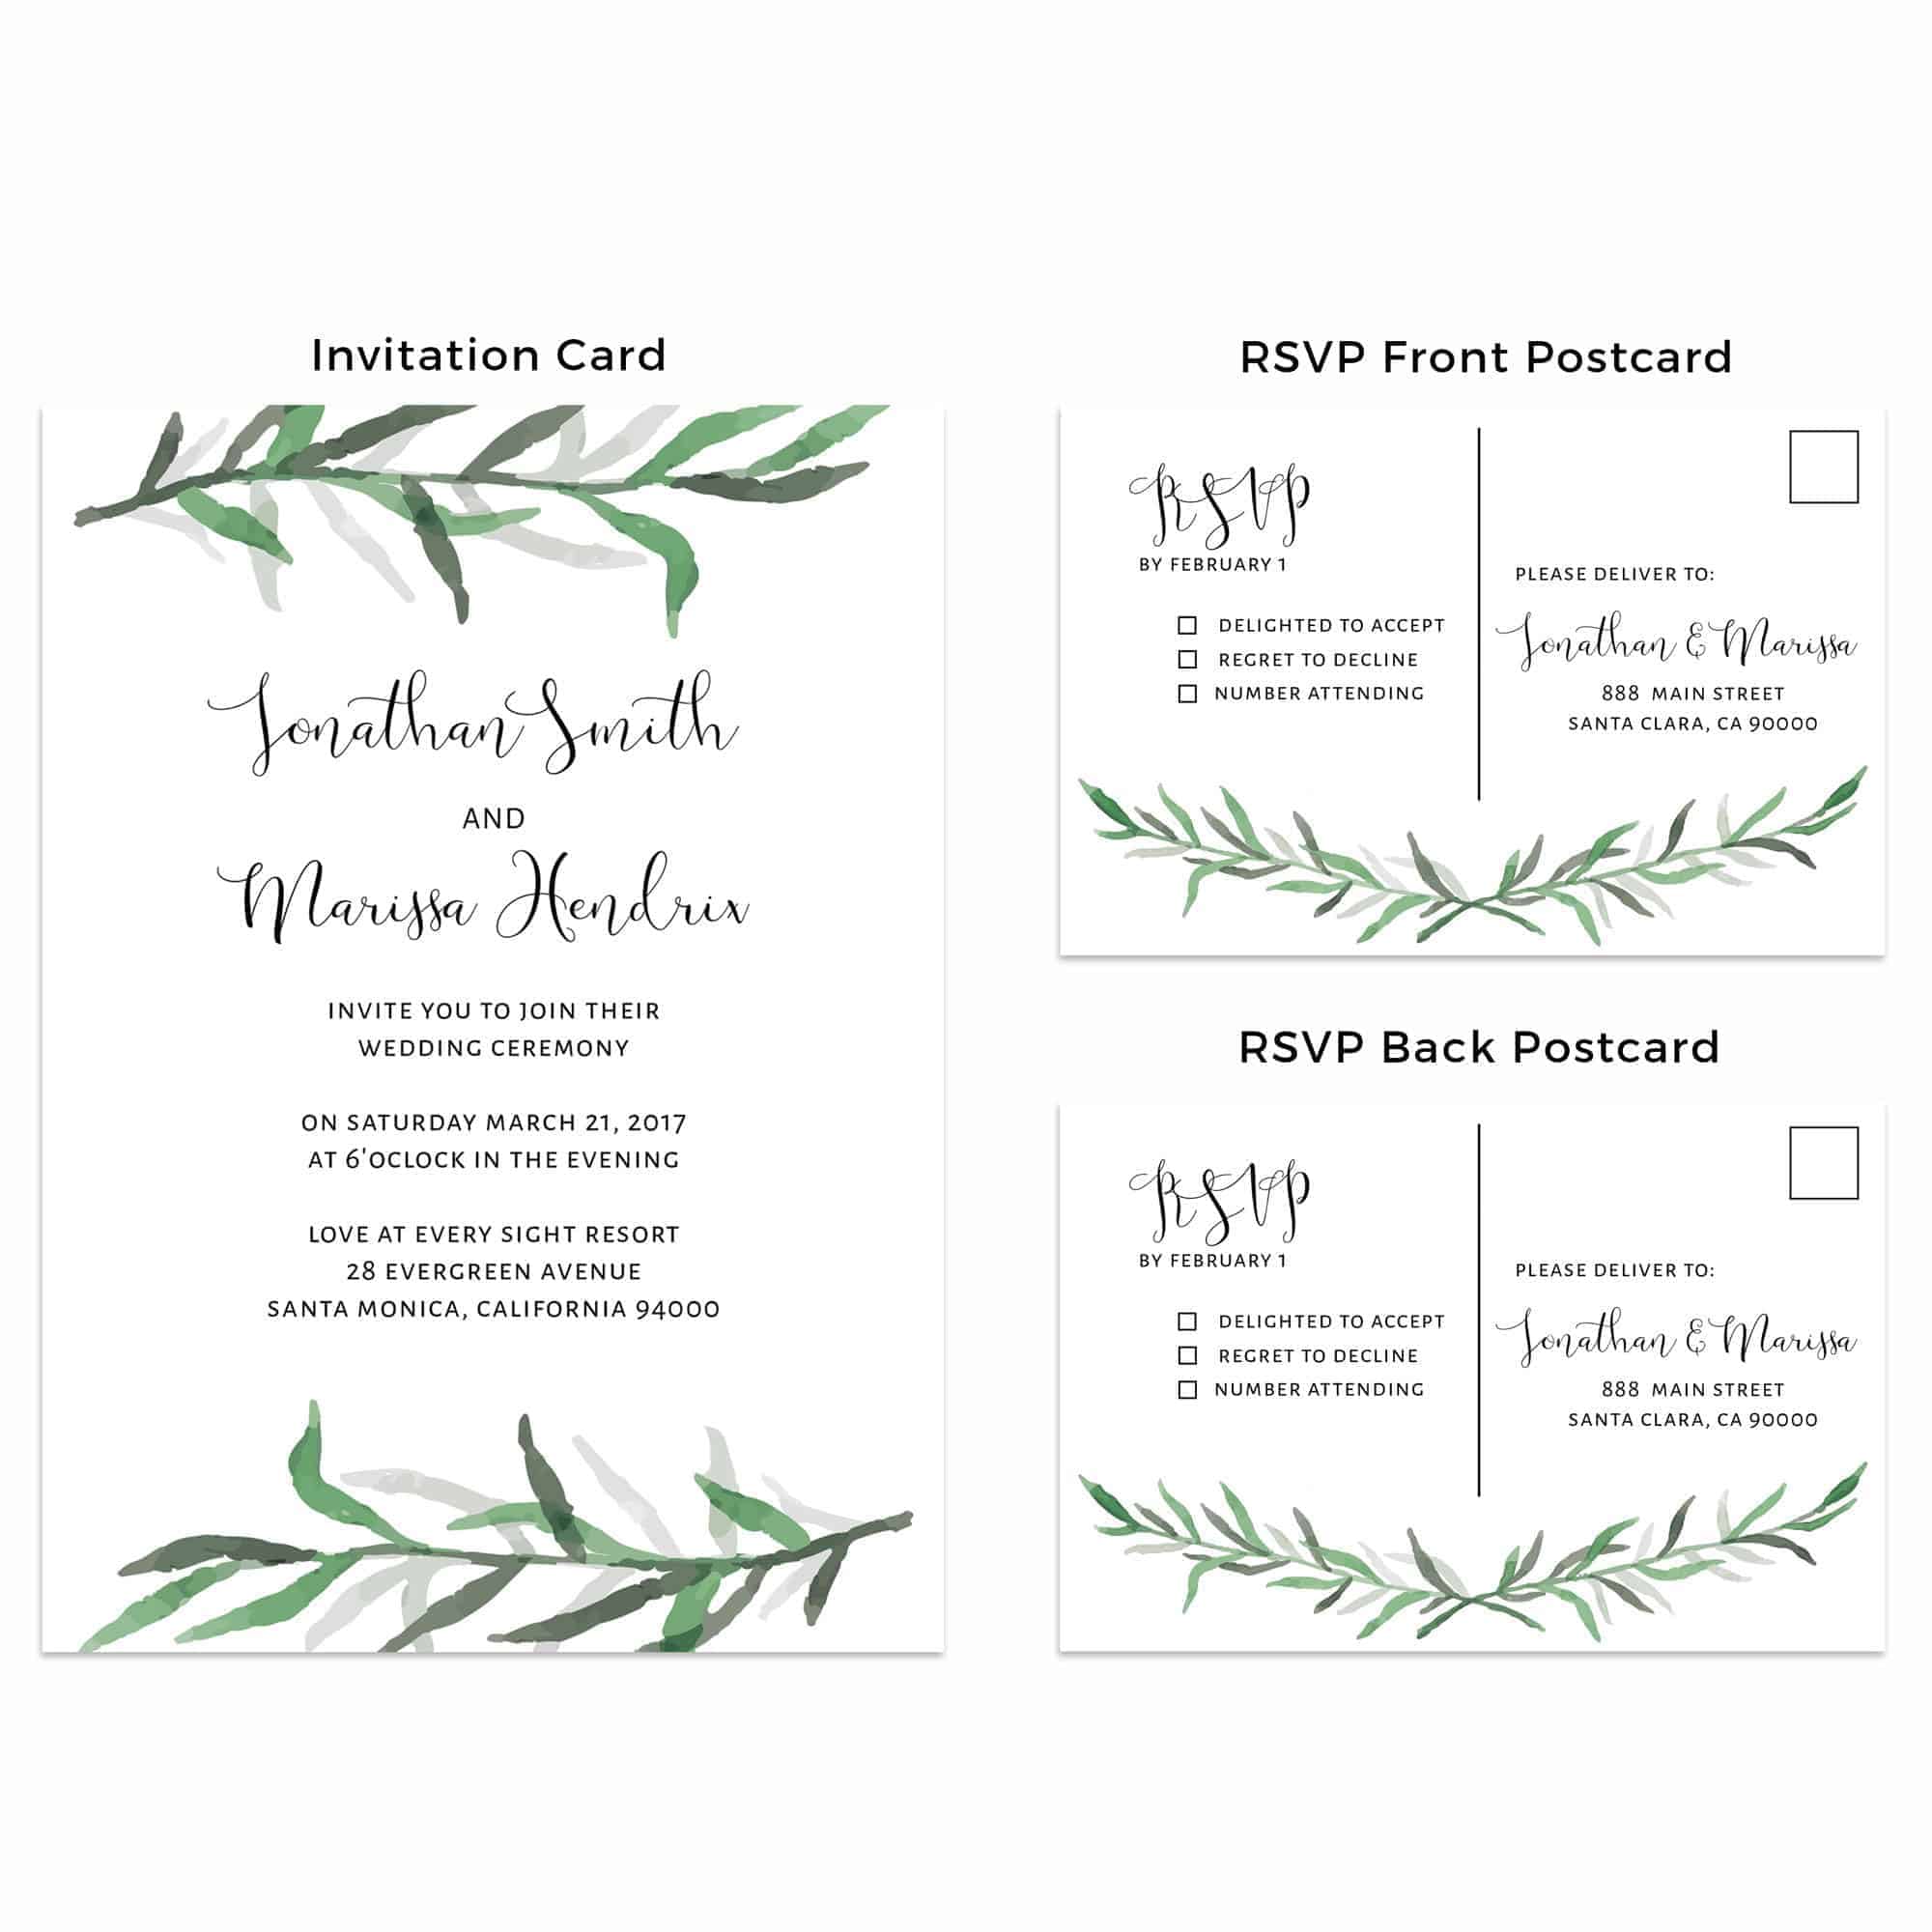 Simple Wedding Invitation Cards With Rsvp Postcards Branches Nature